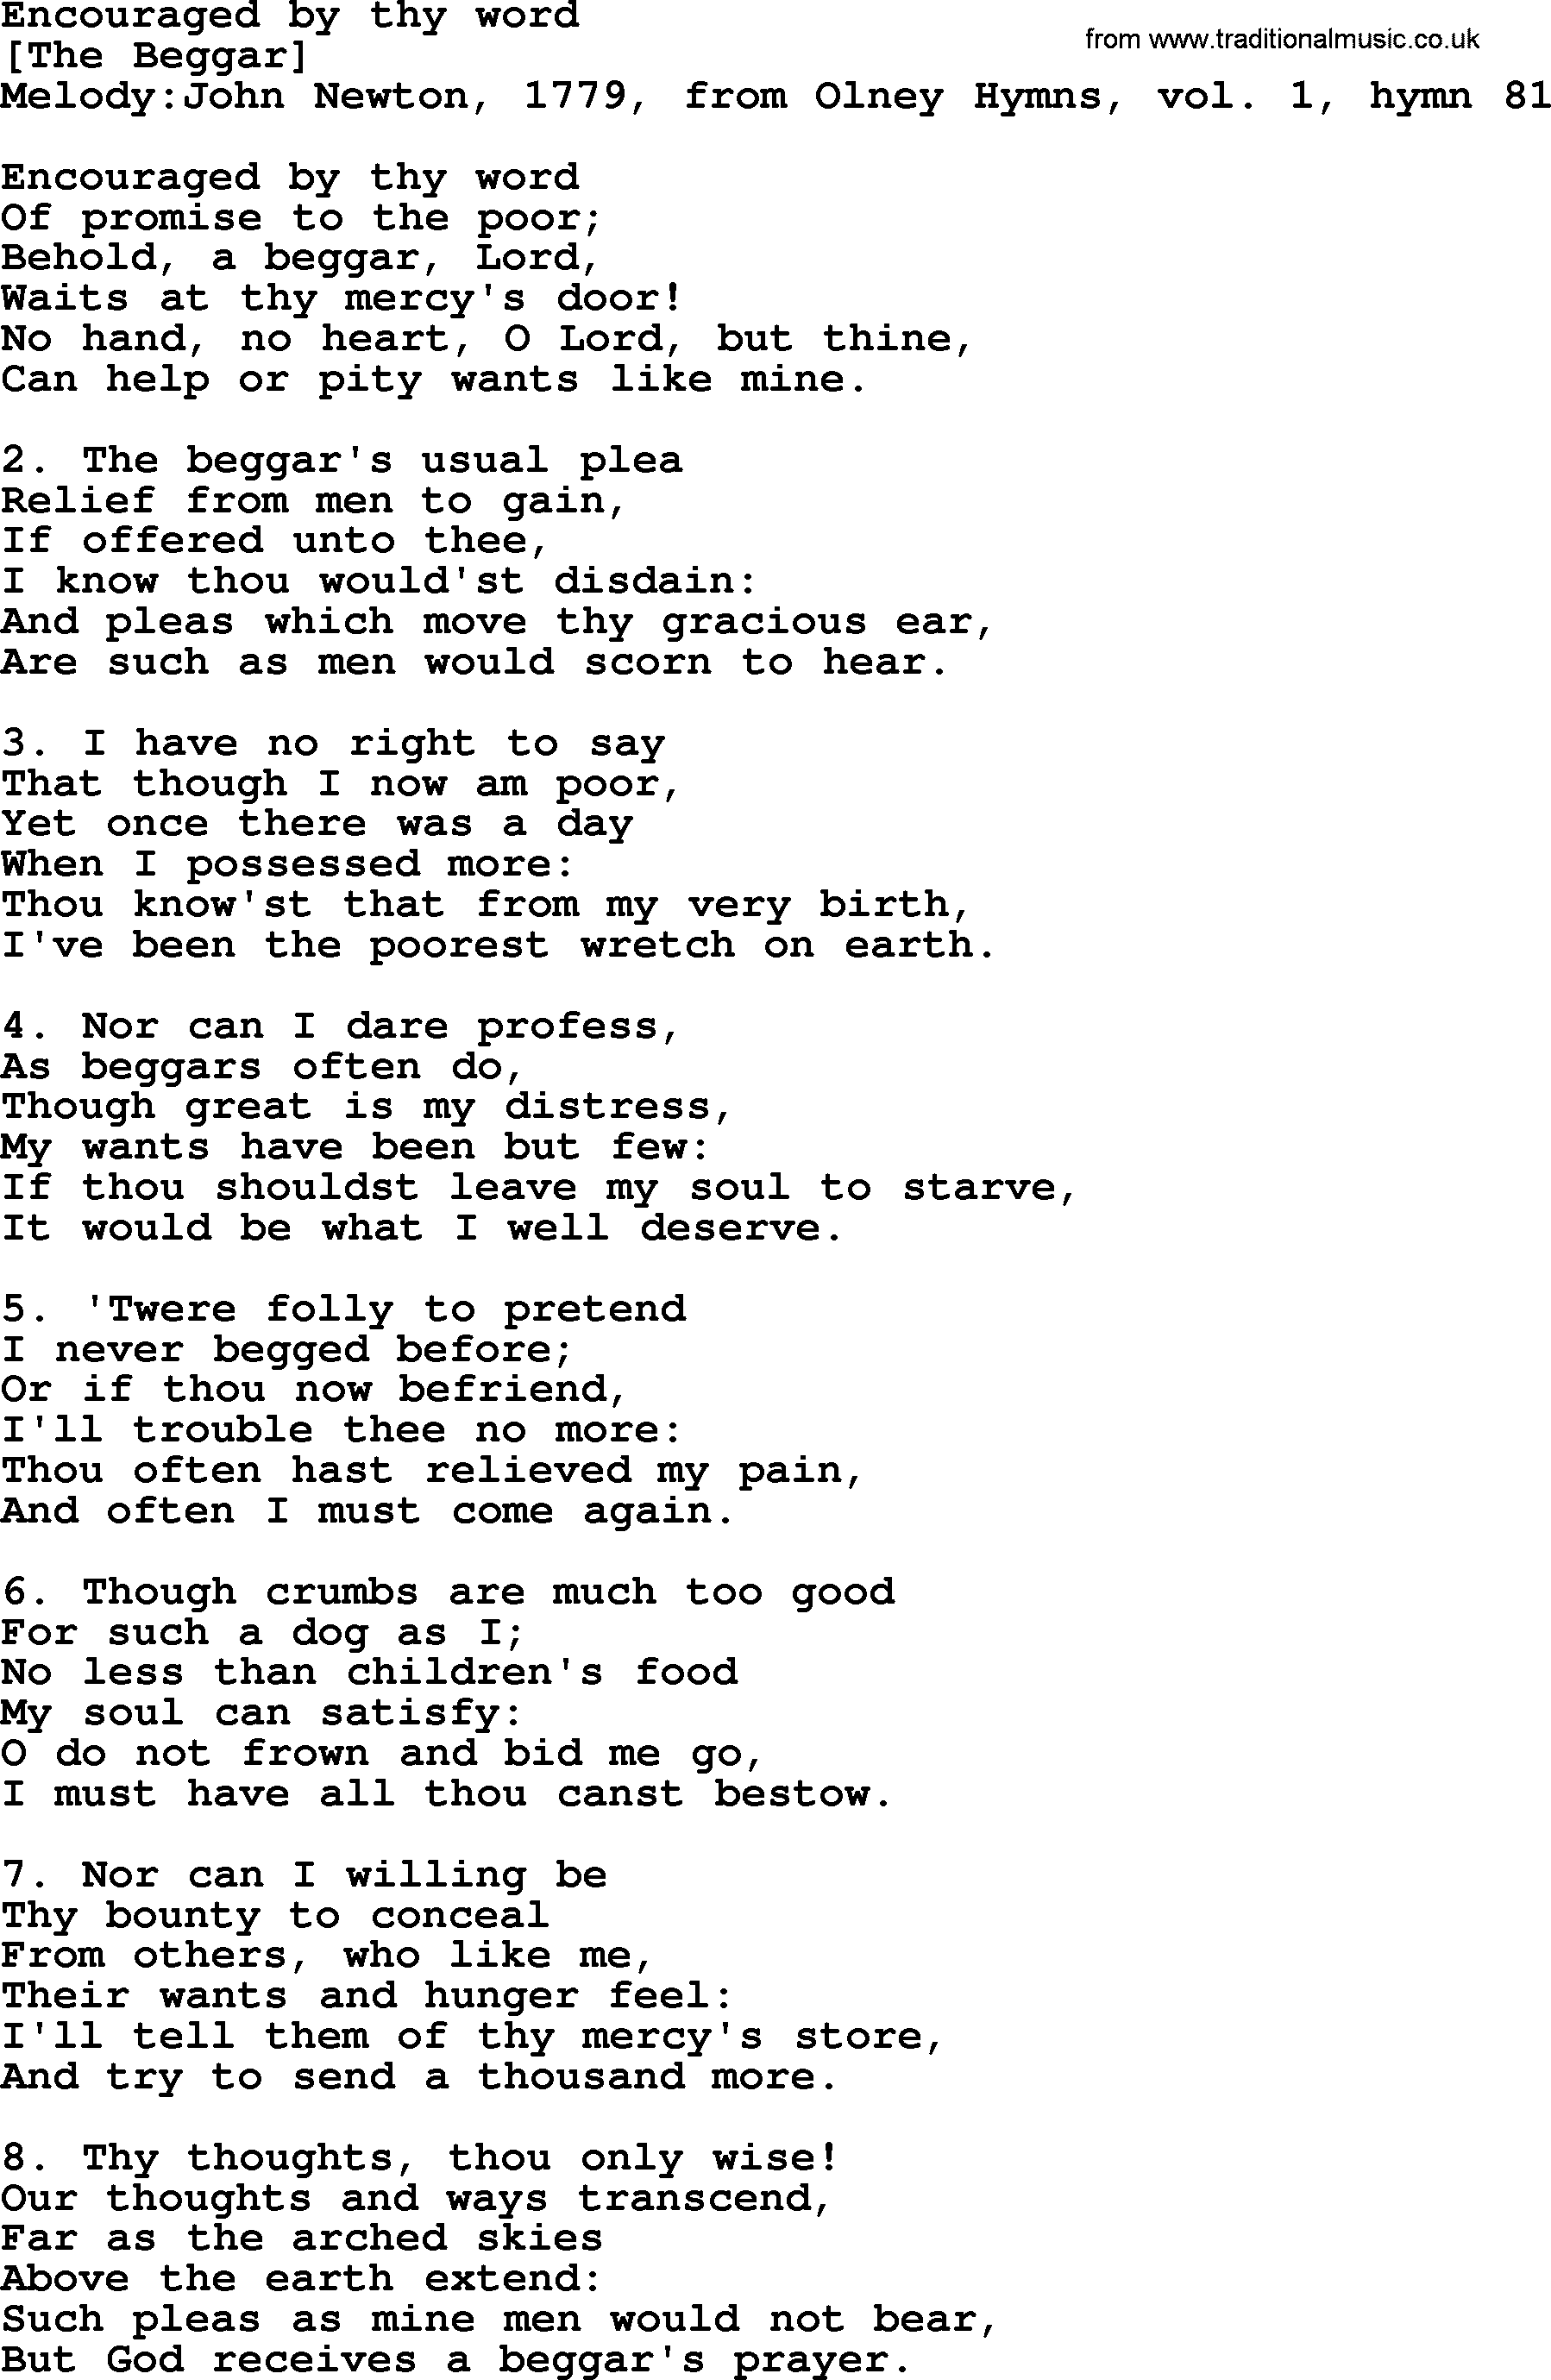 Old English Song Lyrics for Encouraged By Thy Word, with PDF